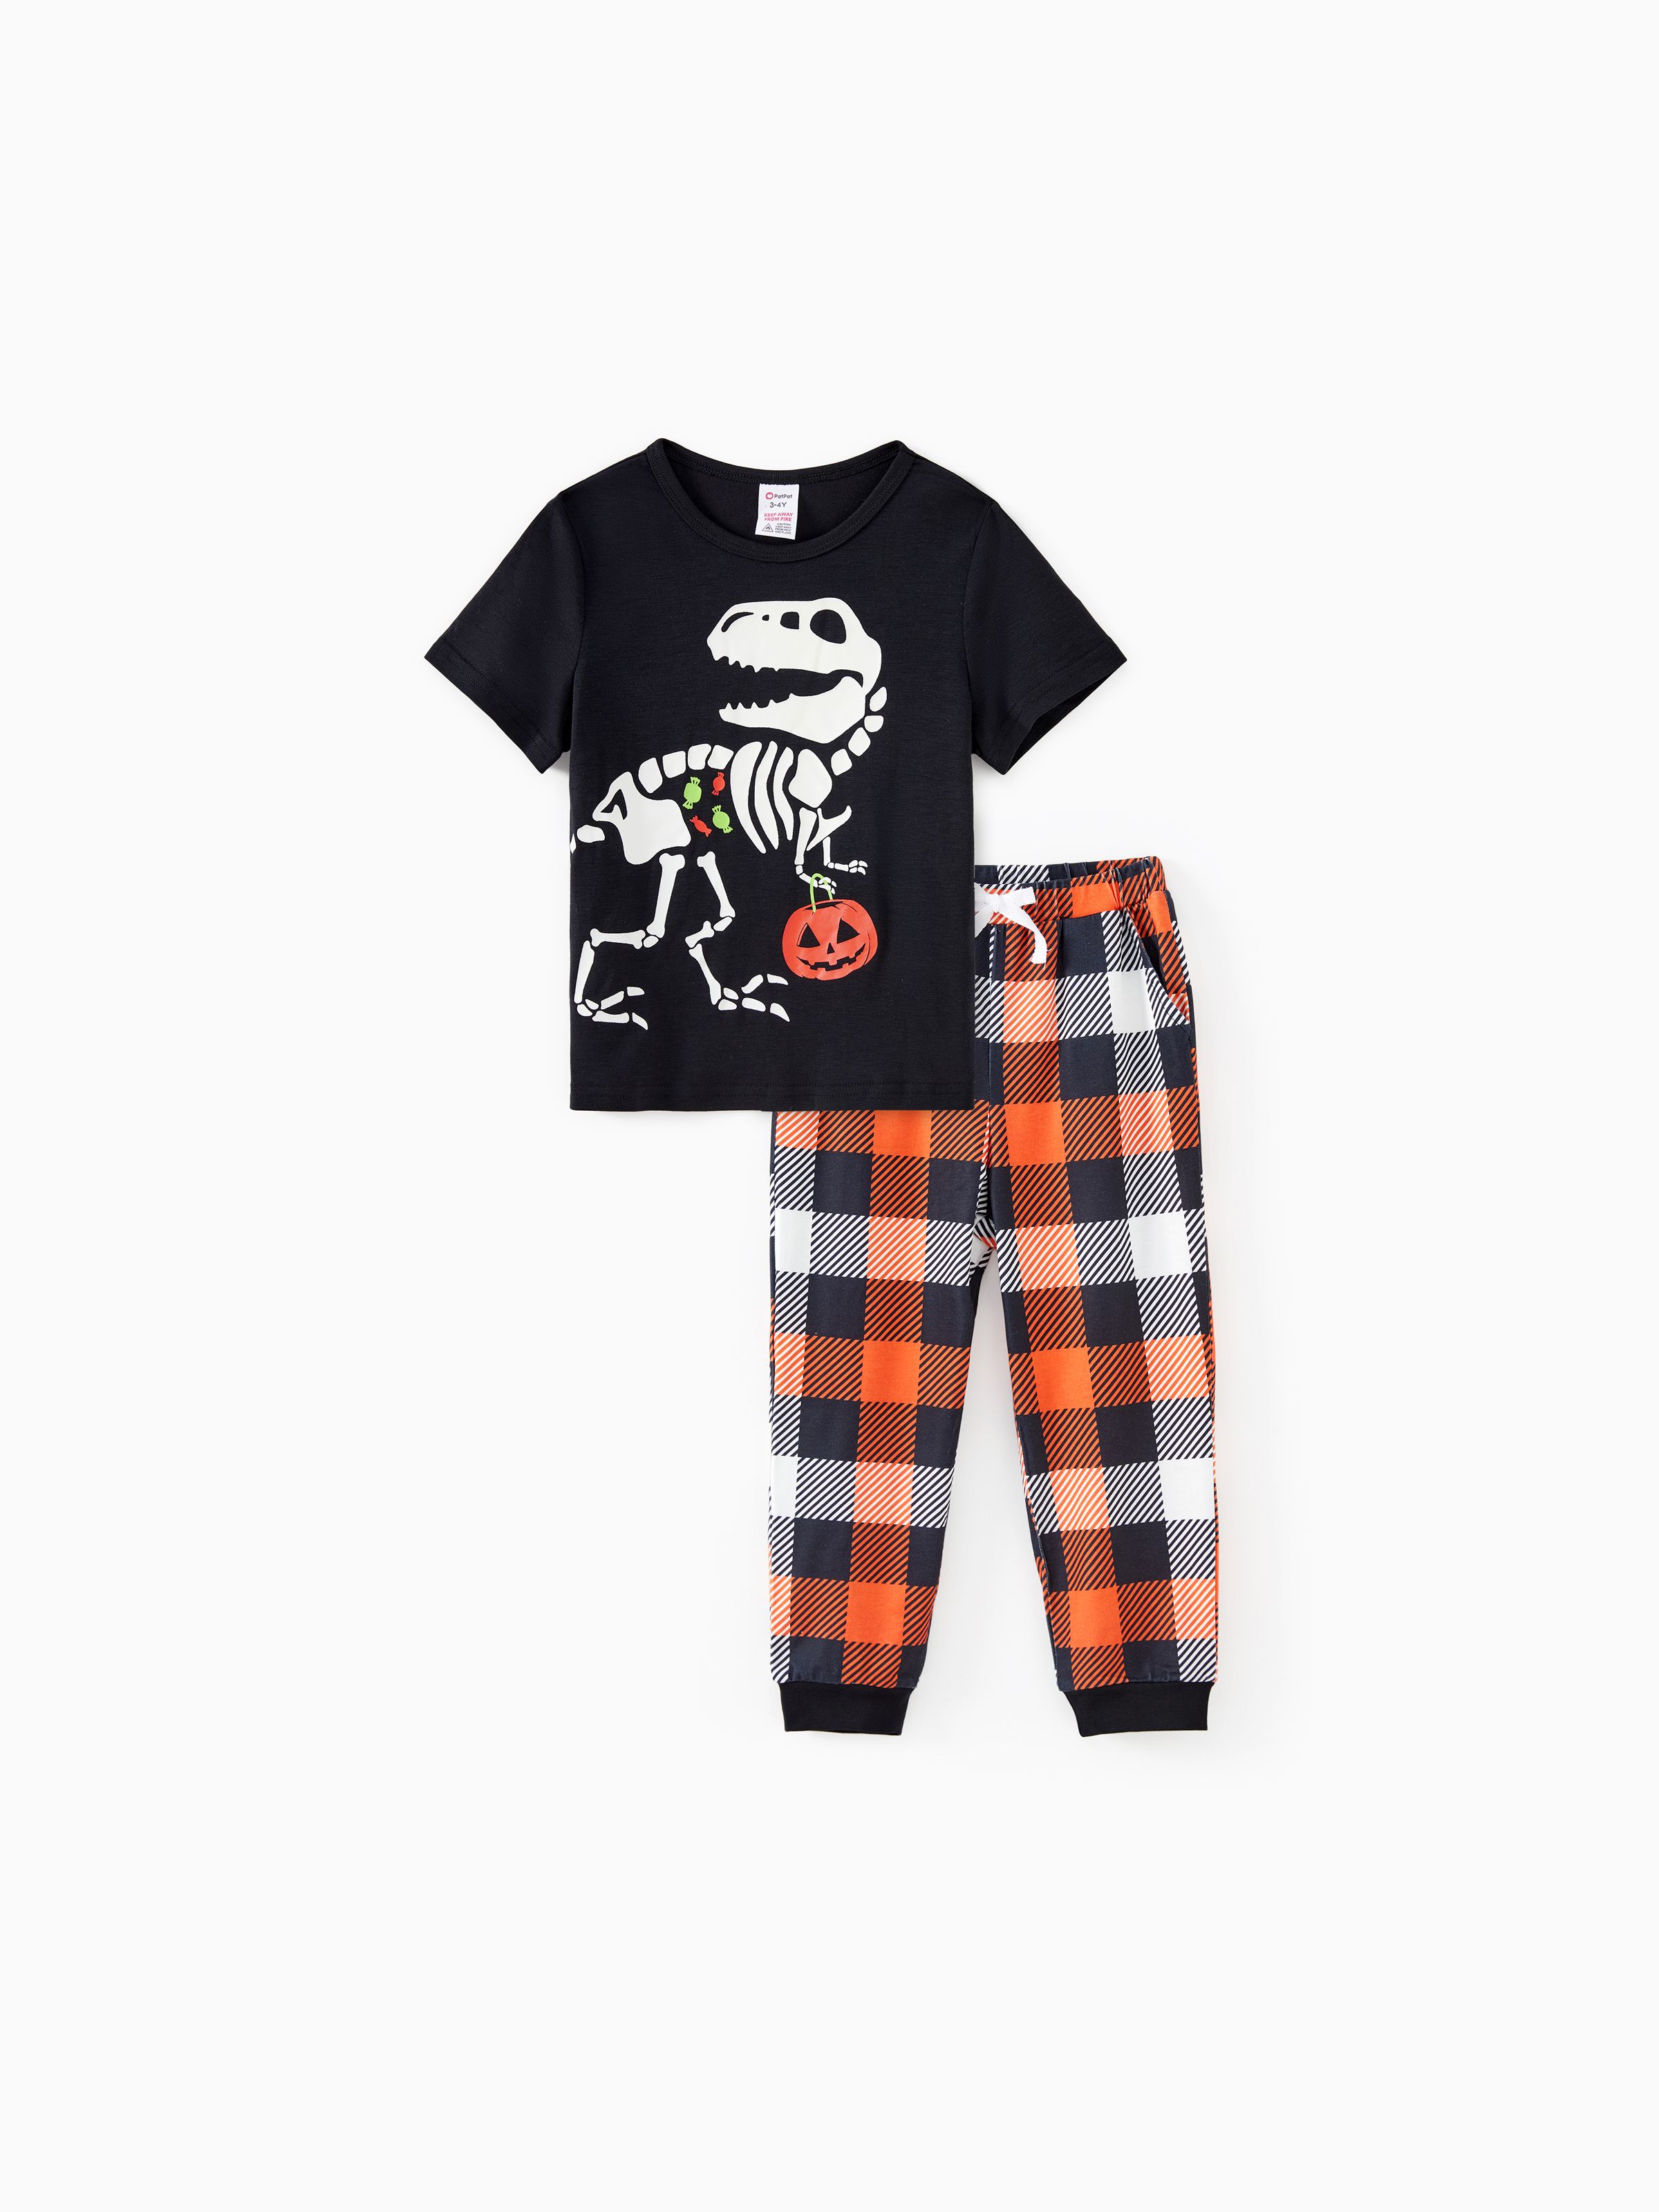 

Halloween Family Matching Glow in the Dark Dinosaur Skeleton Pumpkin Pattern Short Sleeves Top Plaid Pants Pajamas Sets with Pockets (Flame Resistant)